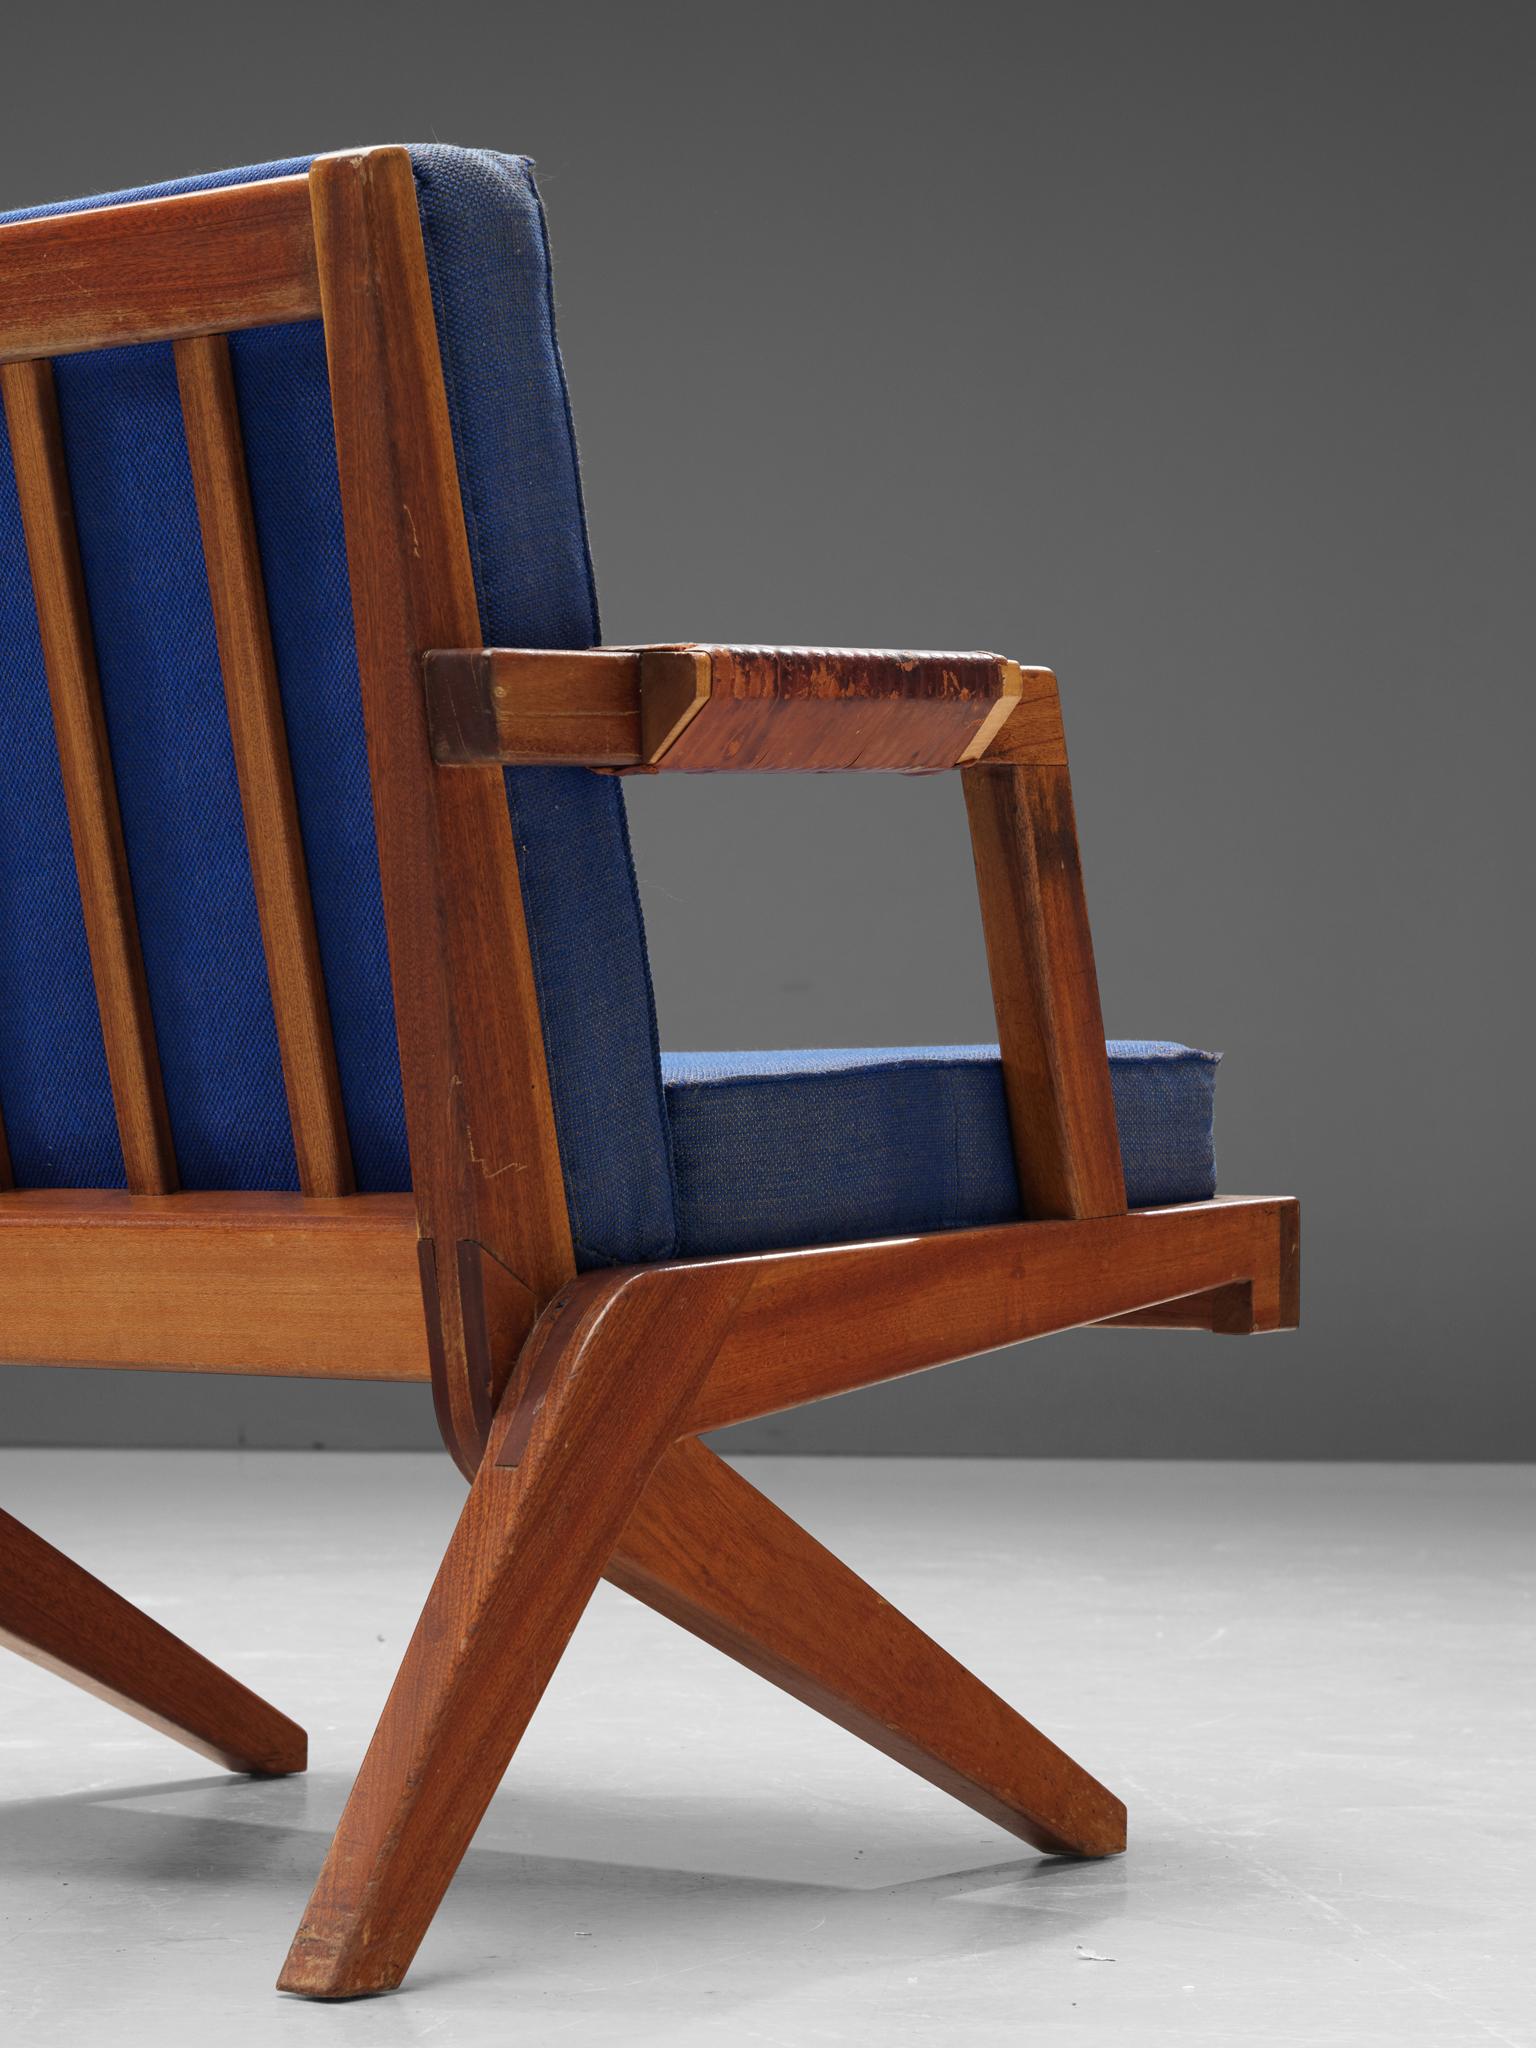 Olavi Hanninen 'Boomerang' Chairs with Blue Upholstery 1